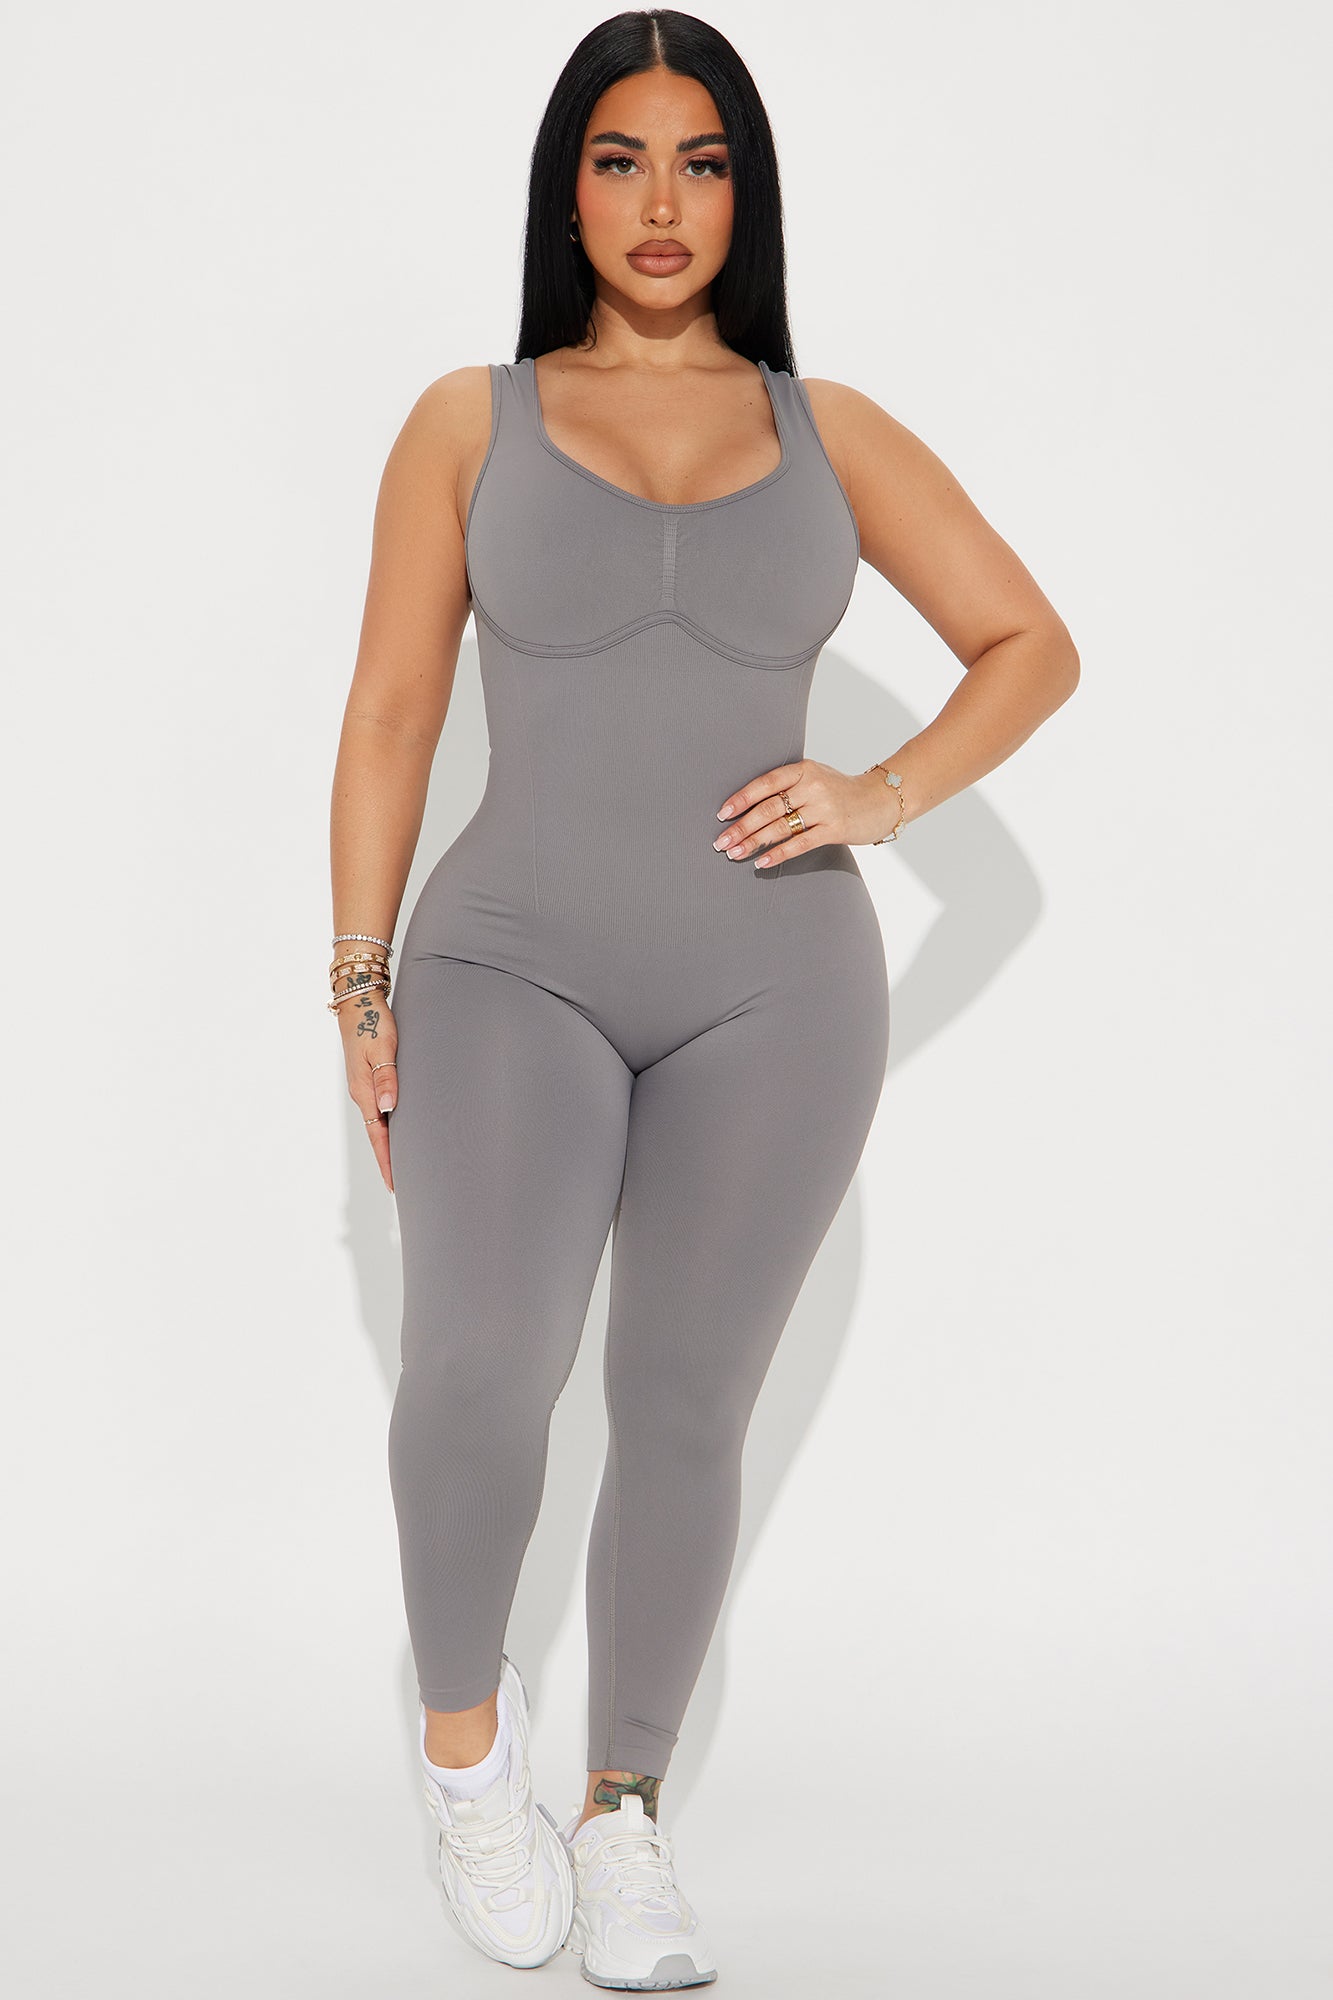 Charcoal Seamless Sculpt Leggings – Just Strong